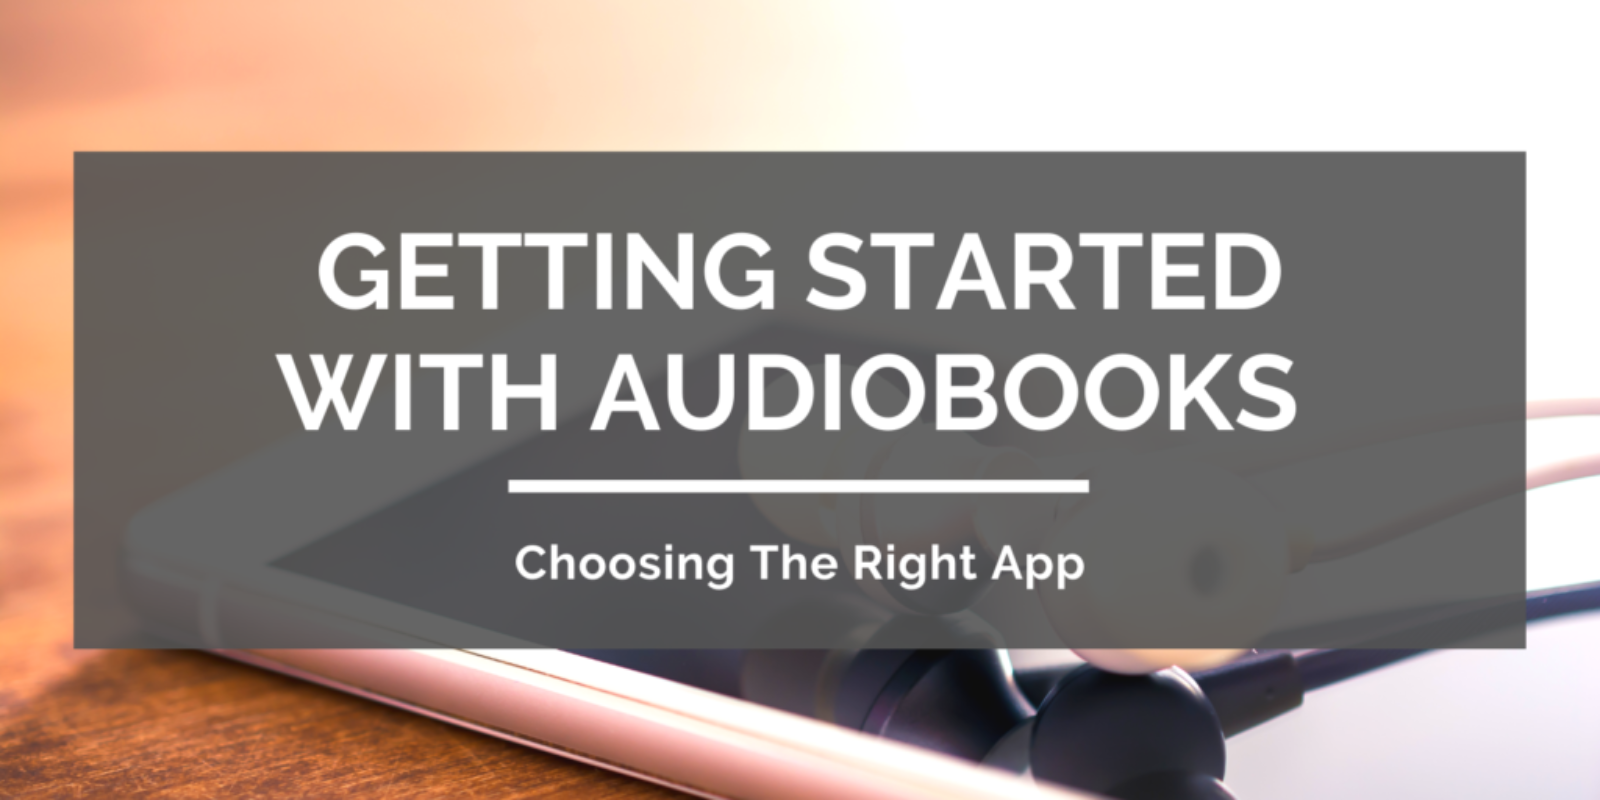 Getting-Started-With-Audiobooks-Choosing-The-Right-App